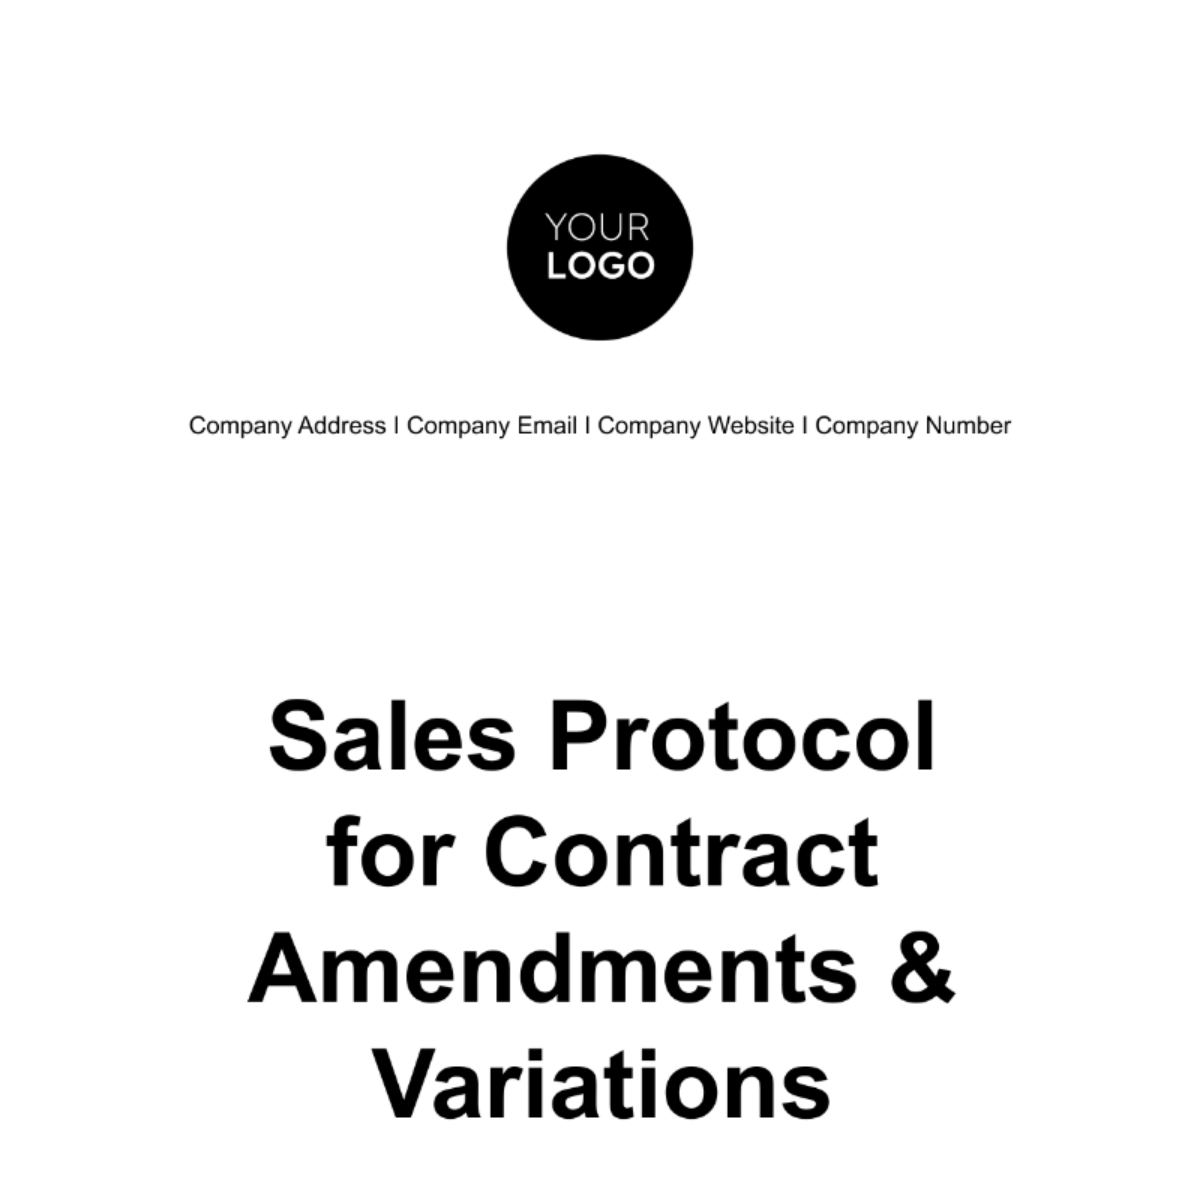 Sales Protocol for Contract Amendments & Variations Template